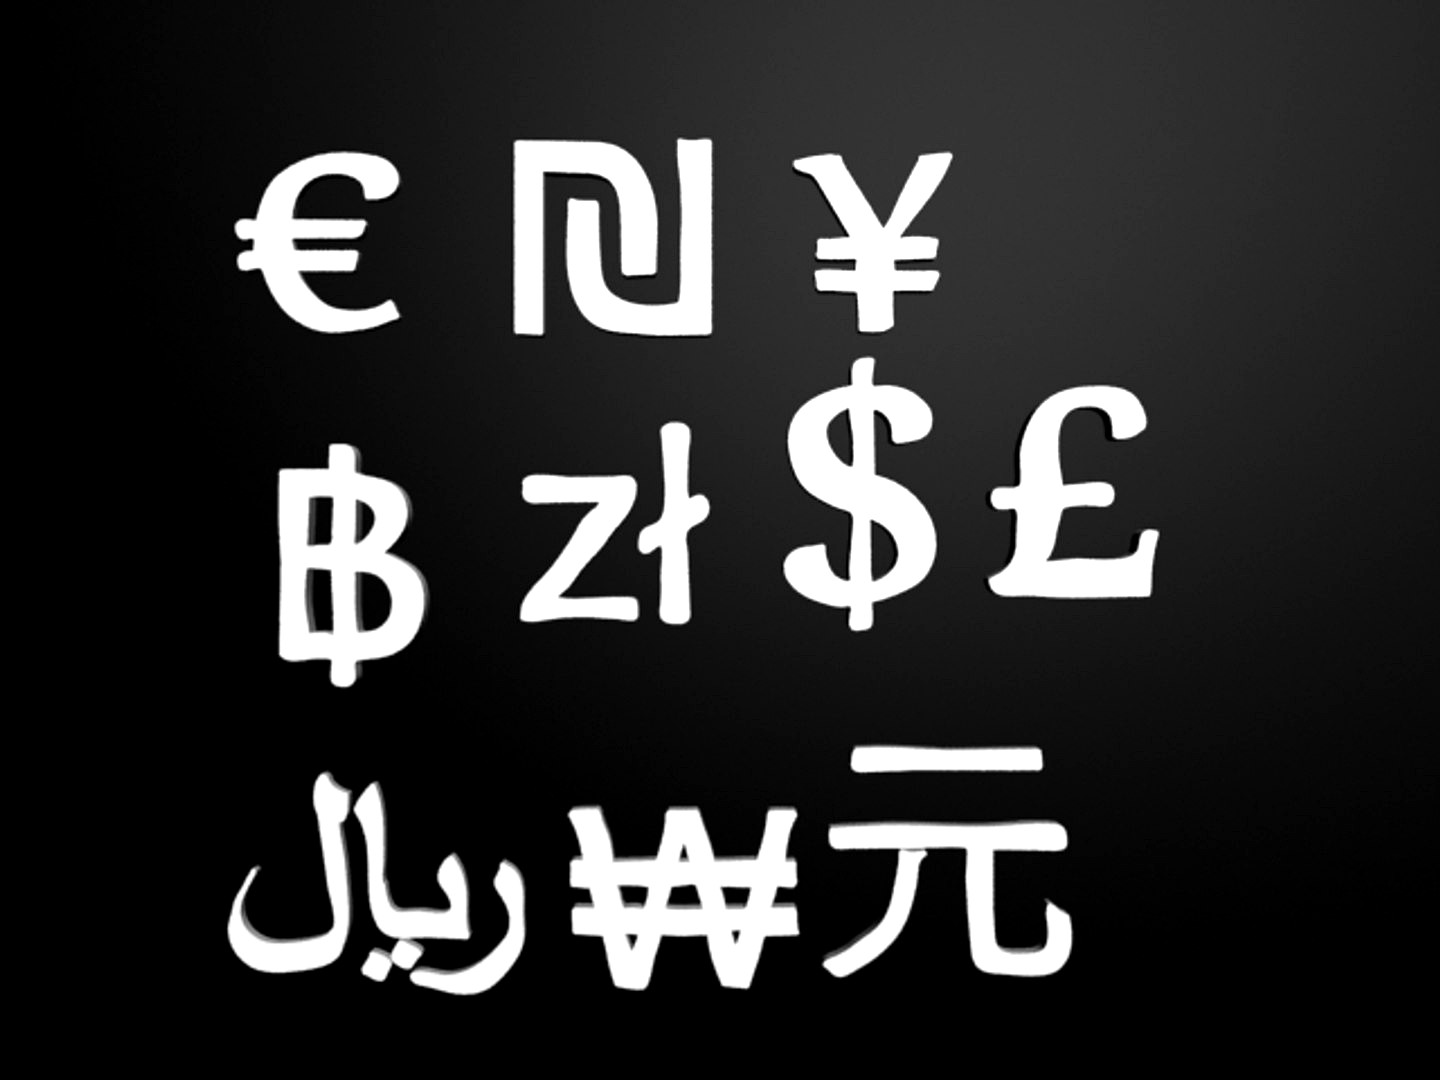 Currency Signs